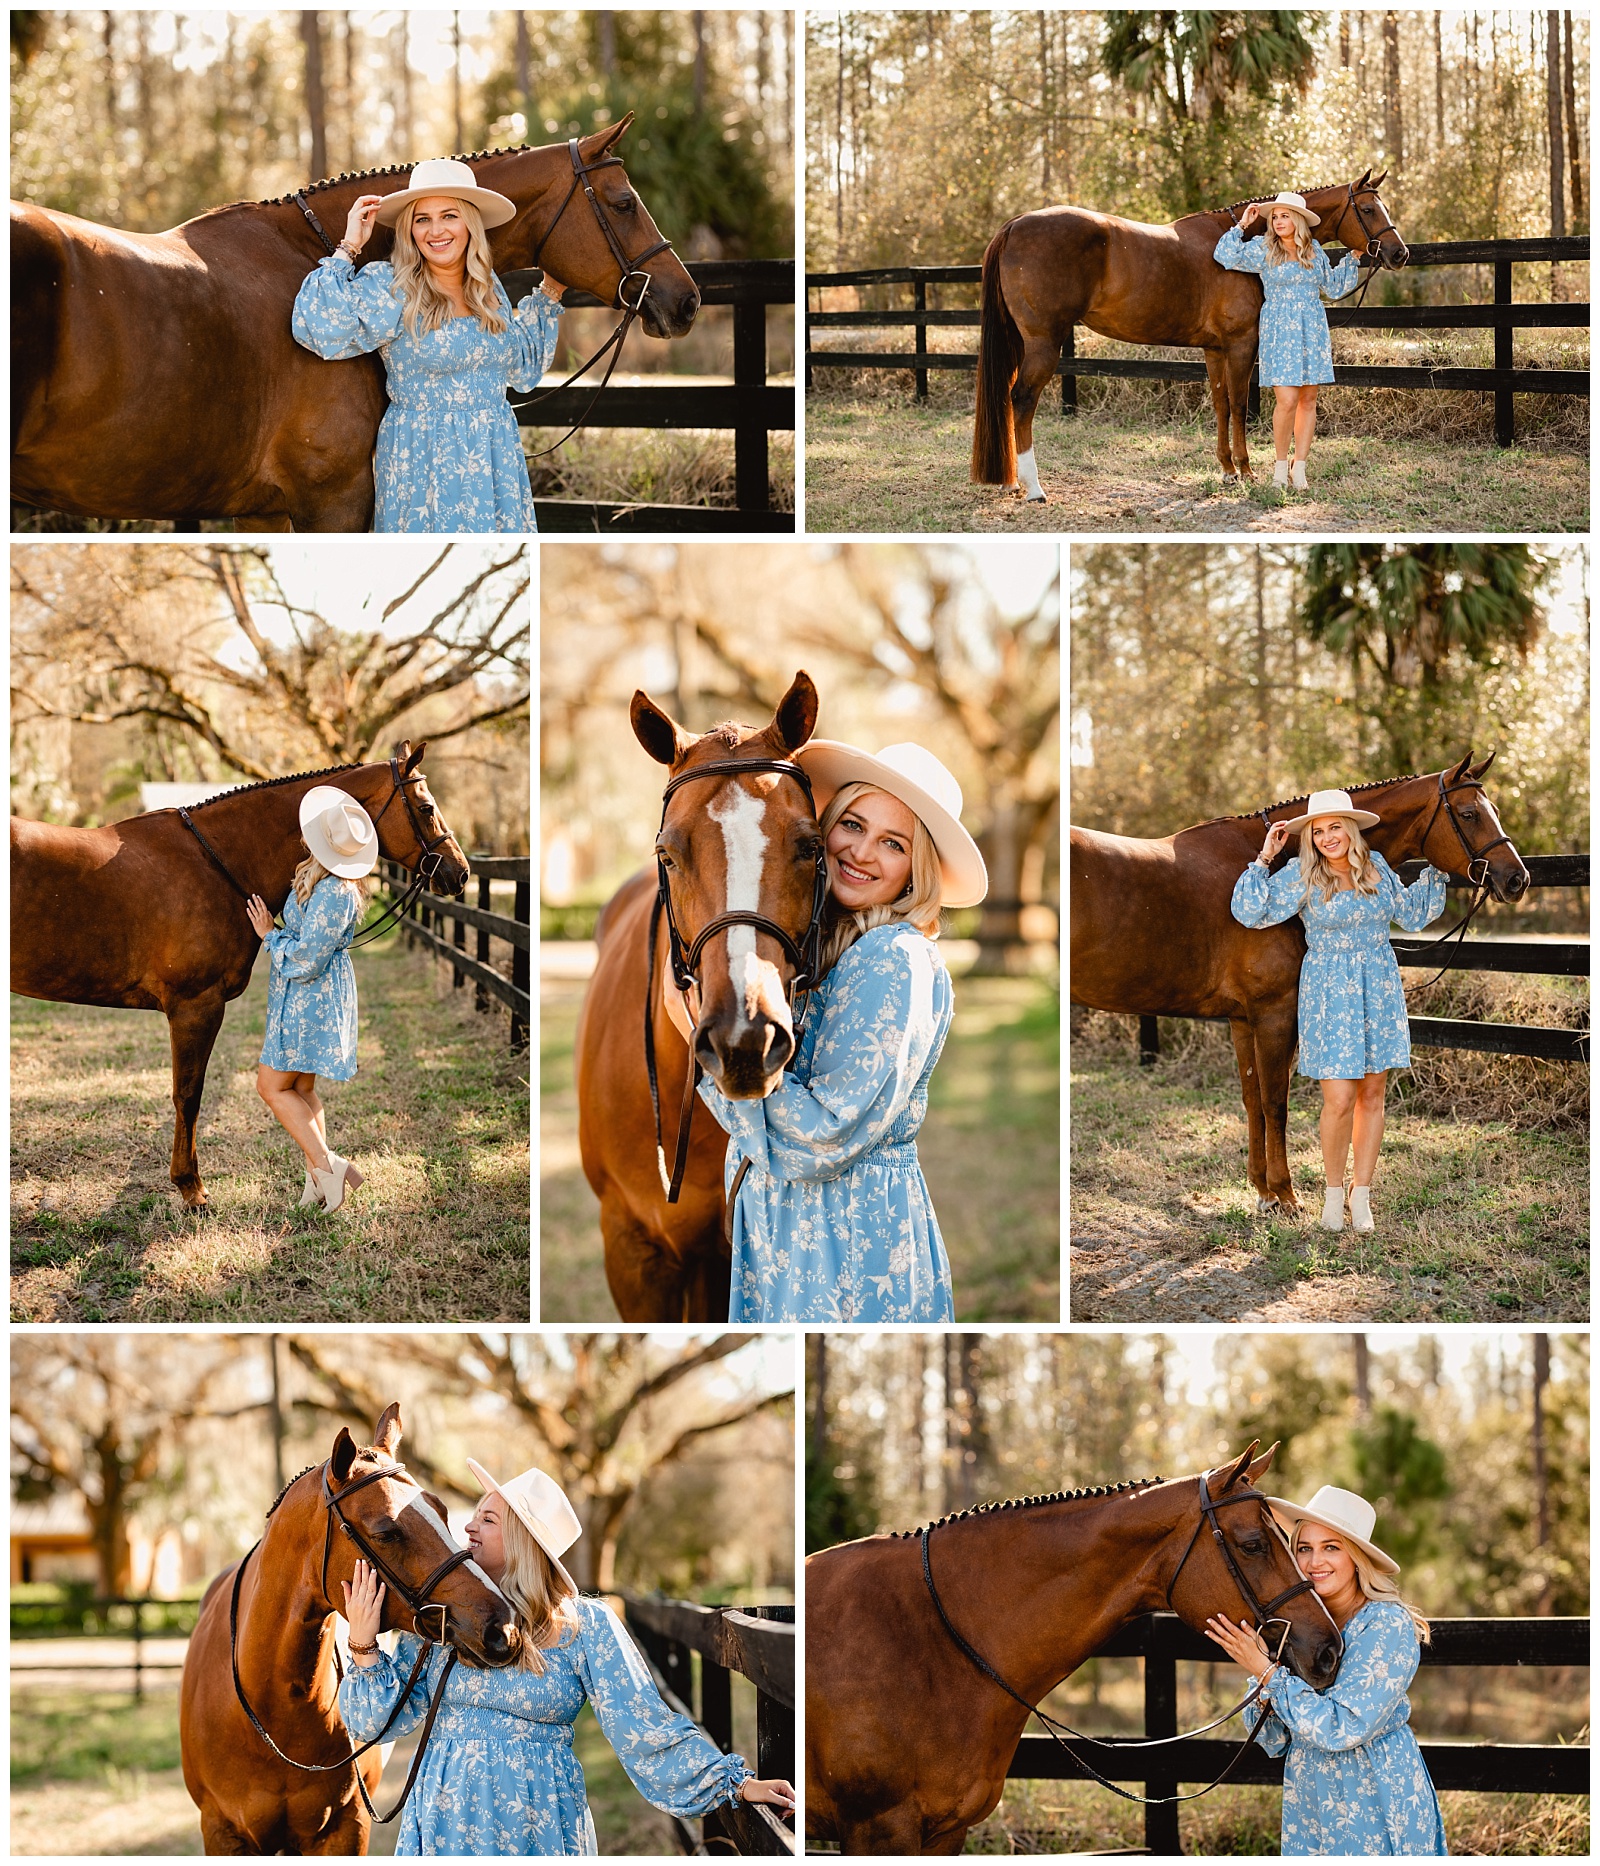 Girl with her hunter under saddle horse has photos taken by Florida pro horse photographer. Posing ideas for girl and her horse.